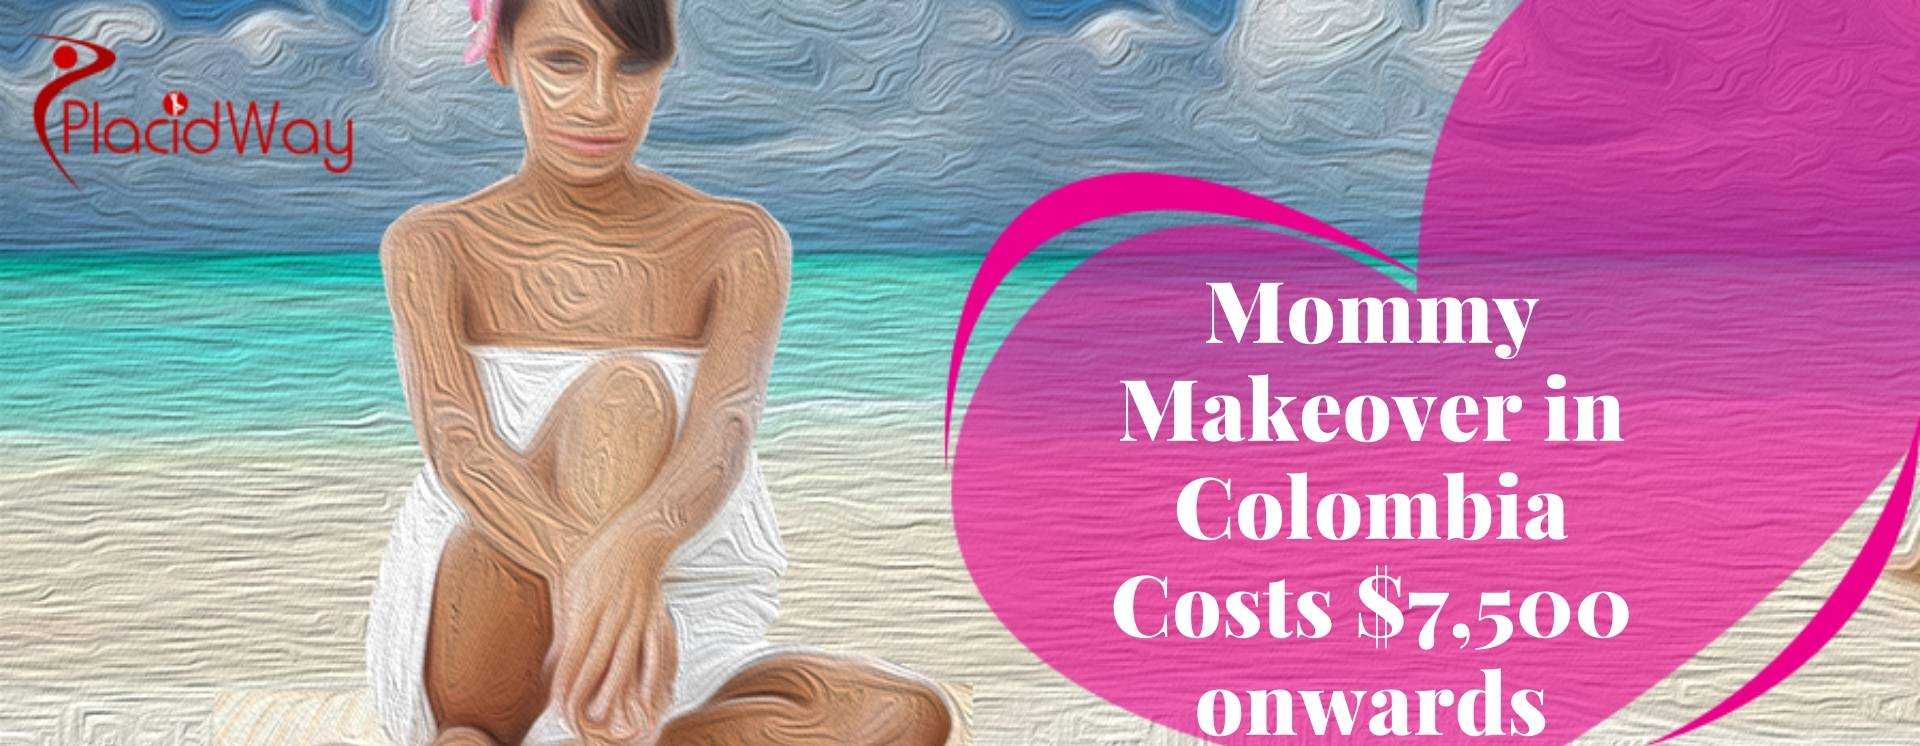 Mommy Makeover Cost Colombia